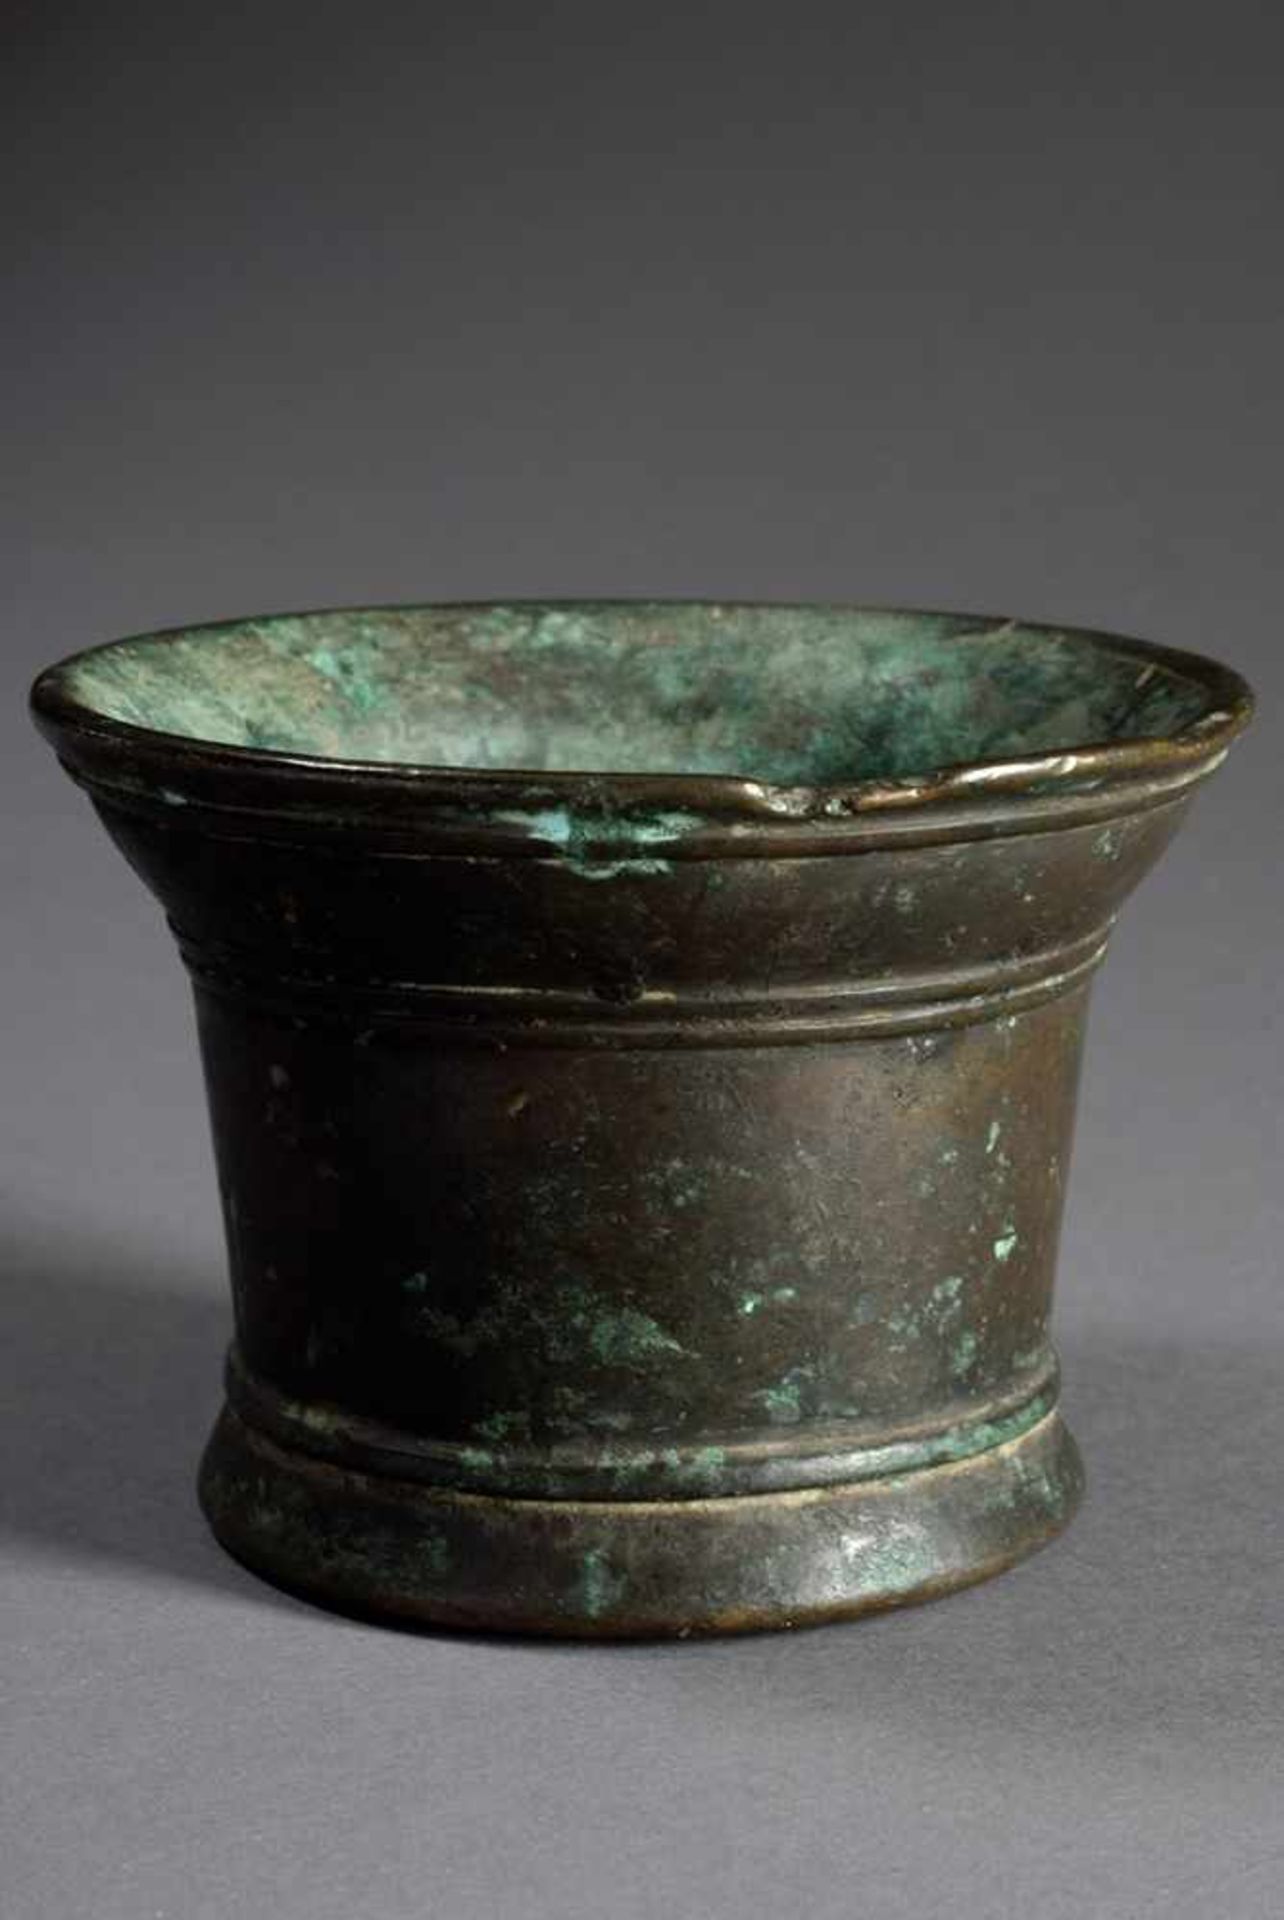 Small bronze mortar with projecting rim and longitudinal grooves, dark patina, probably German - Bild 2 aus 4